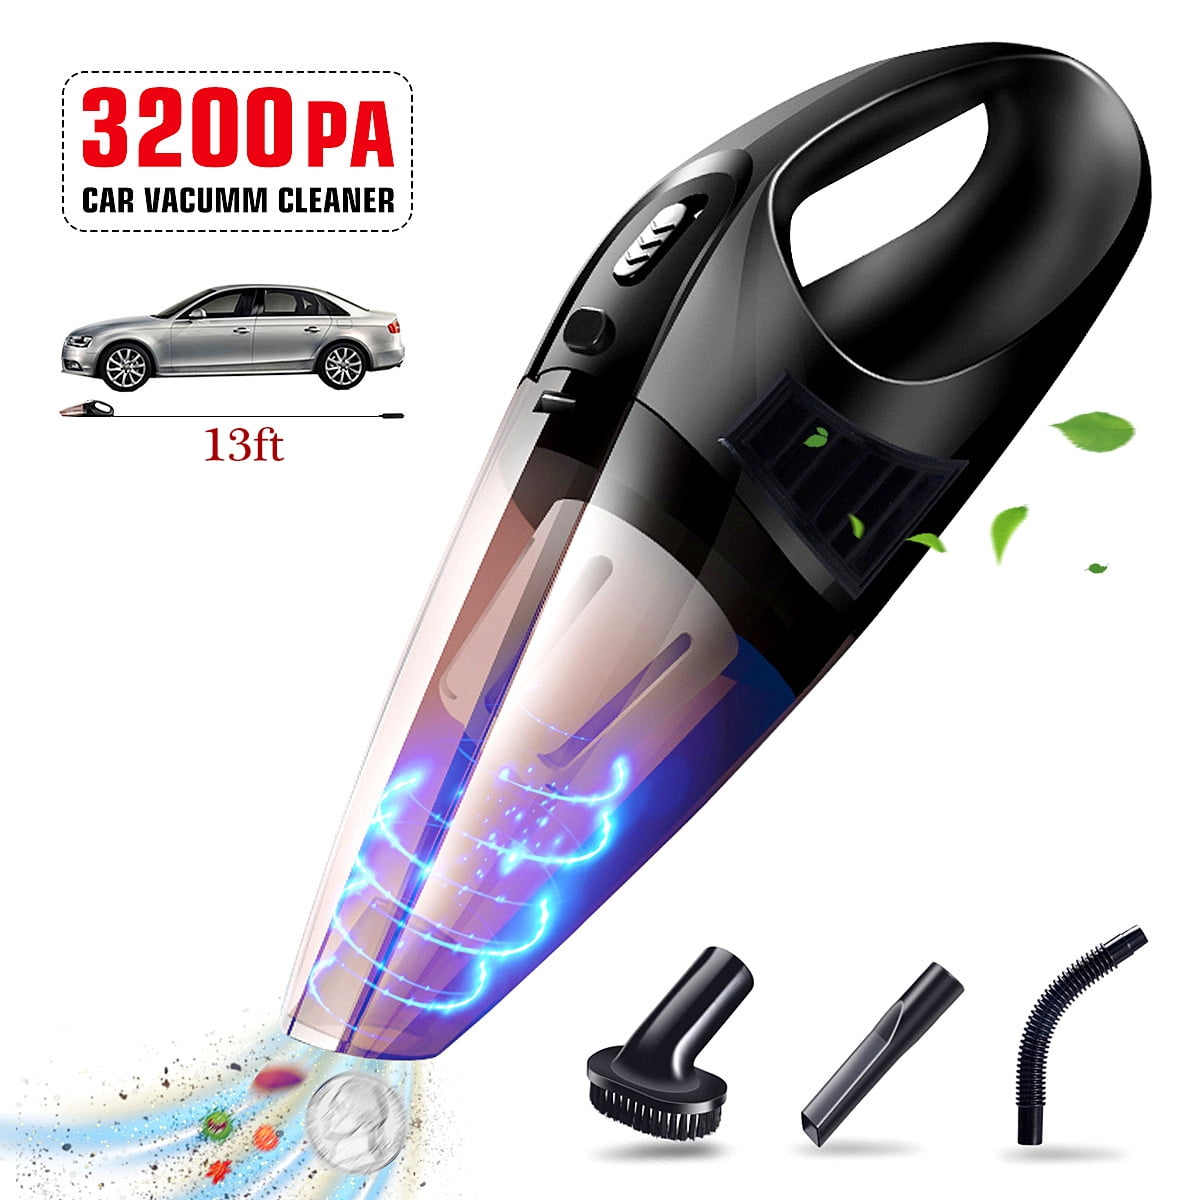 Car Vacuum Cleaner,Handheld Portable Vacuum Cleaner for Car Use Only,5000PA High Power Handheld Vacuum Cleaner,DC 12V 100W Auto Vacuum,for Detailing and Cleaning Car Interior,Wet & Dry,16.4 Ft Corded 